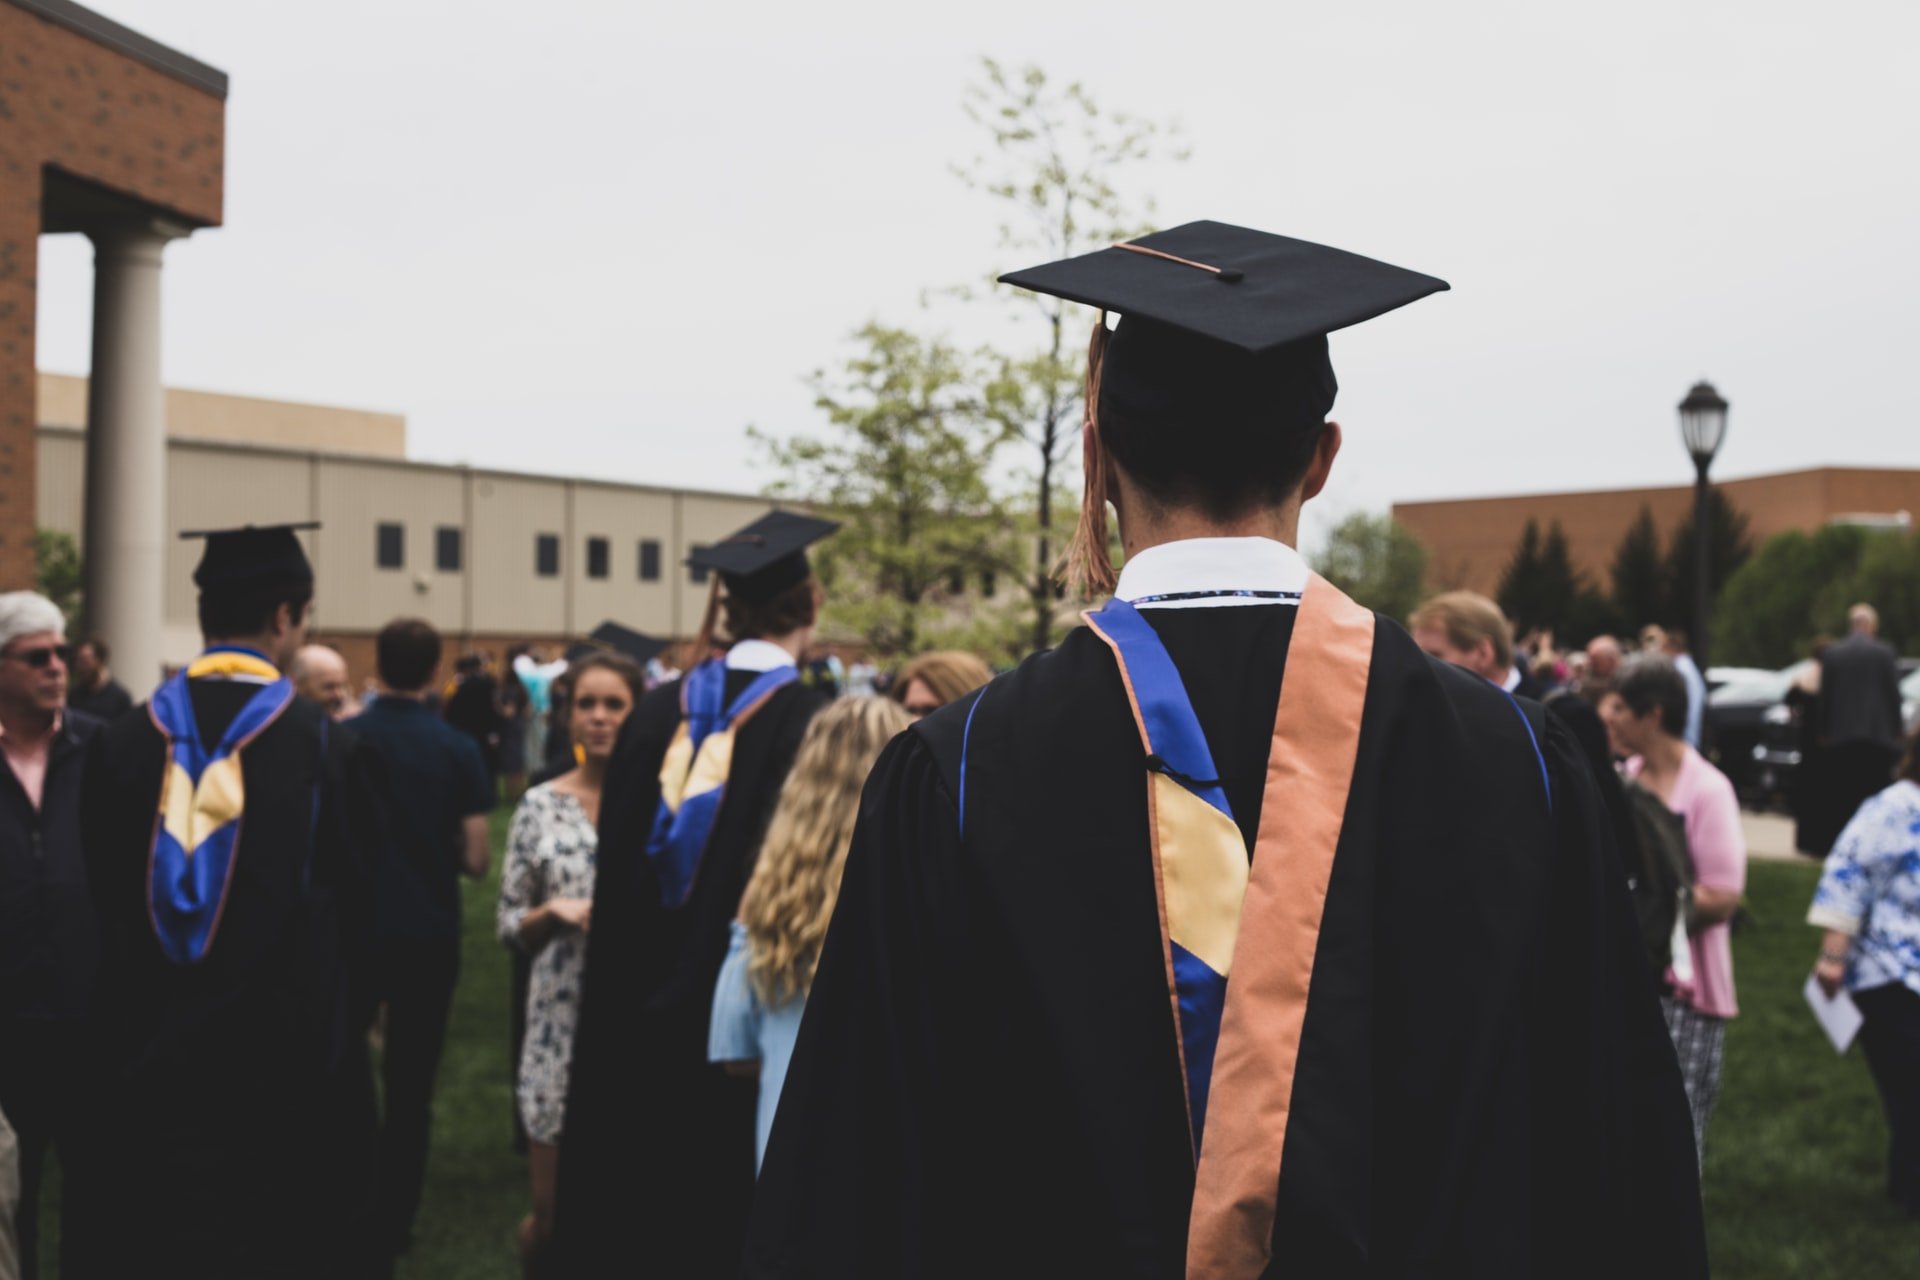 They saw their child graduate from afar. | Source: Unsplash